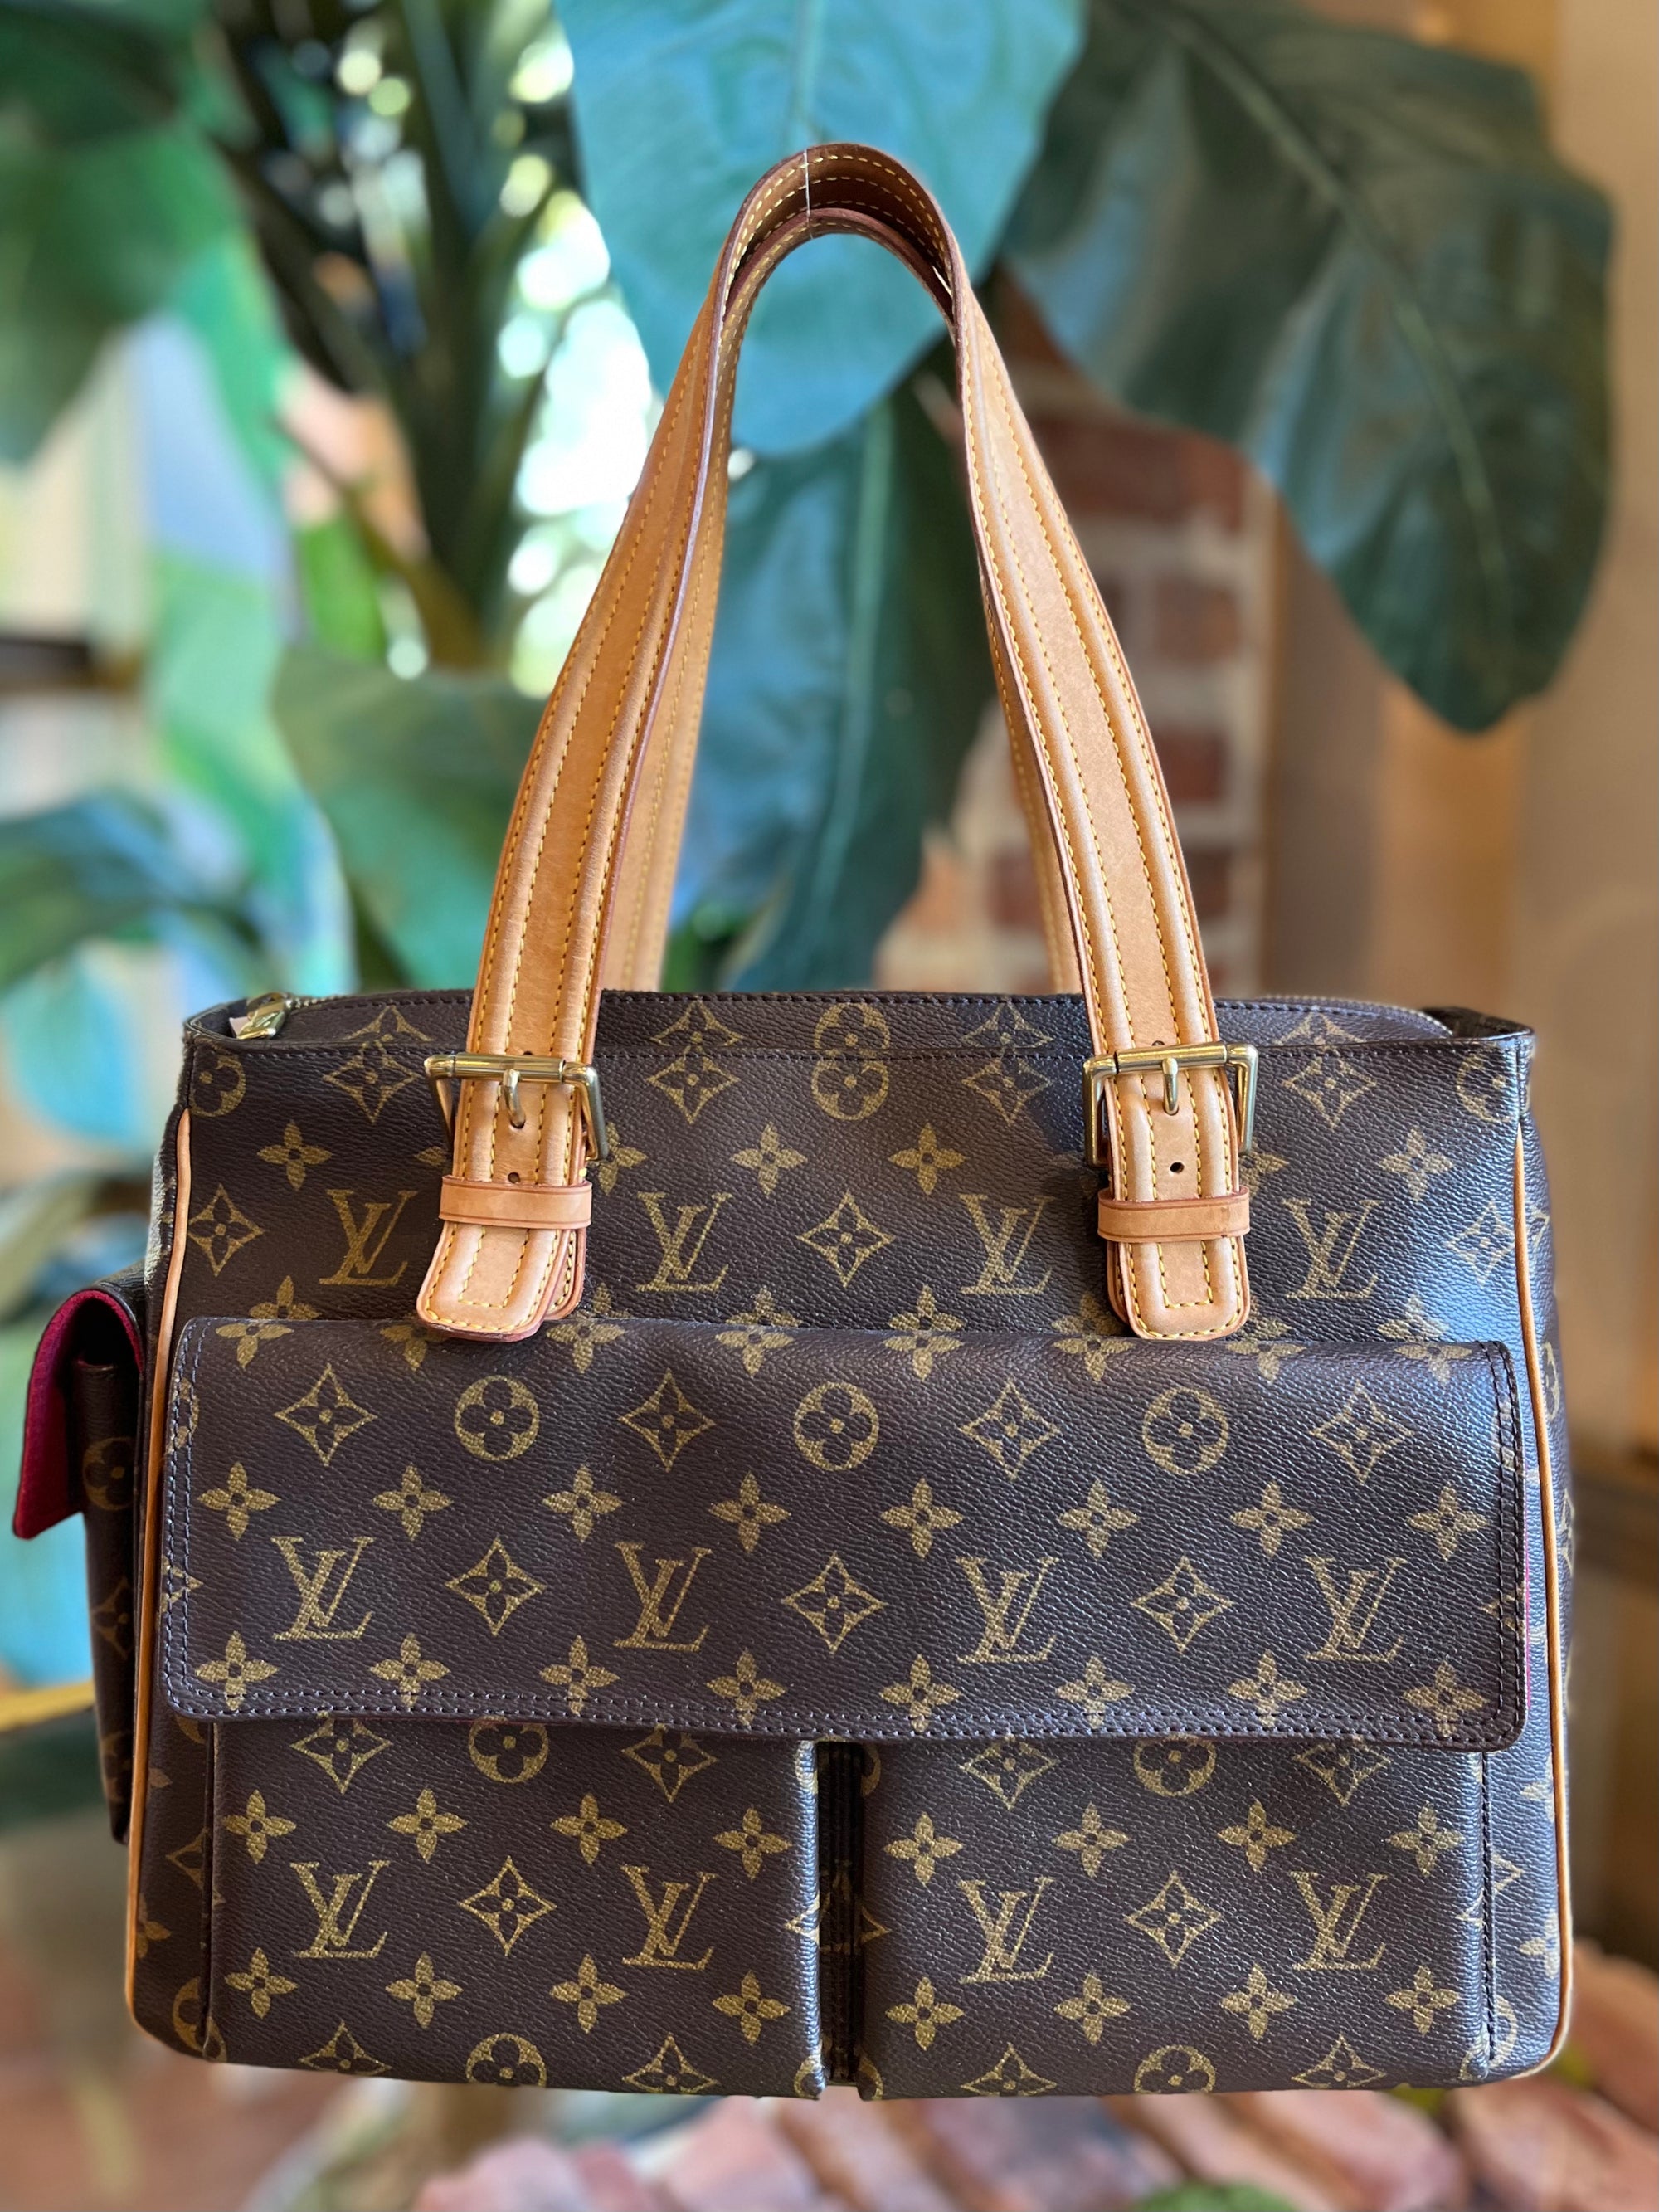 All Products Tagged Brand_Louis Vuitton - The Purse Ladies